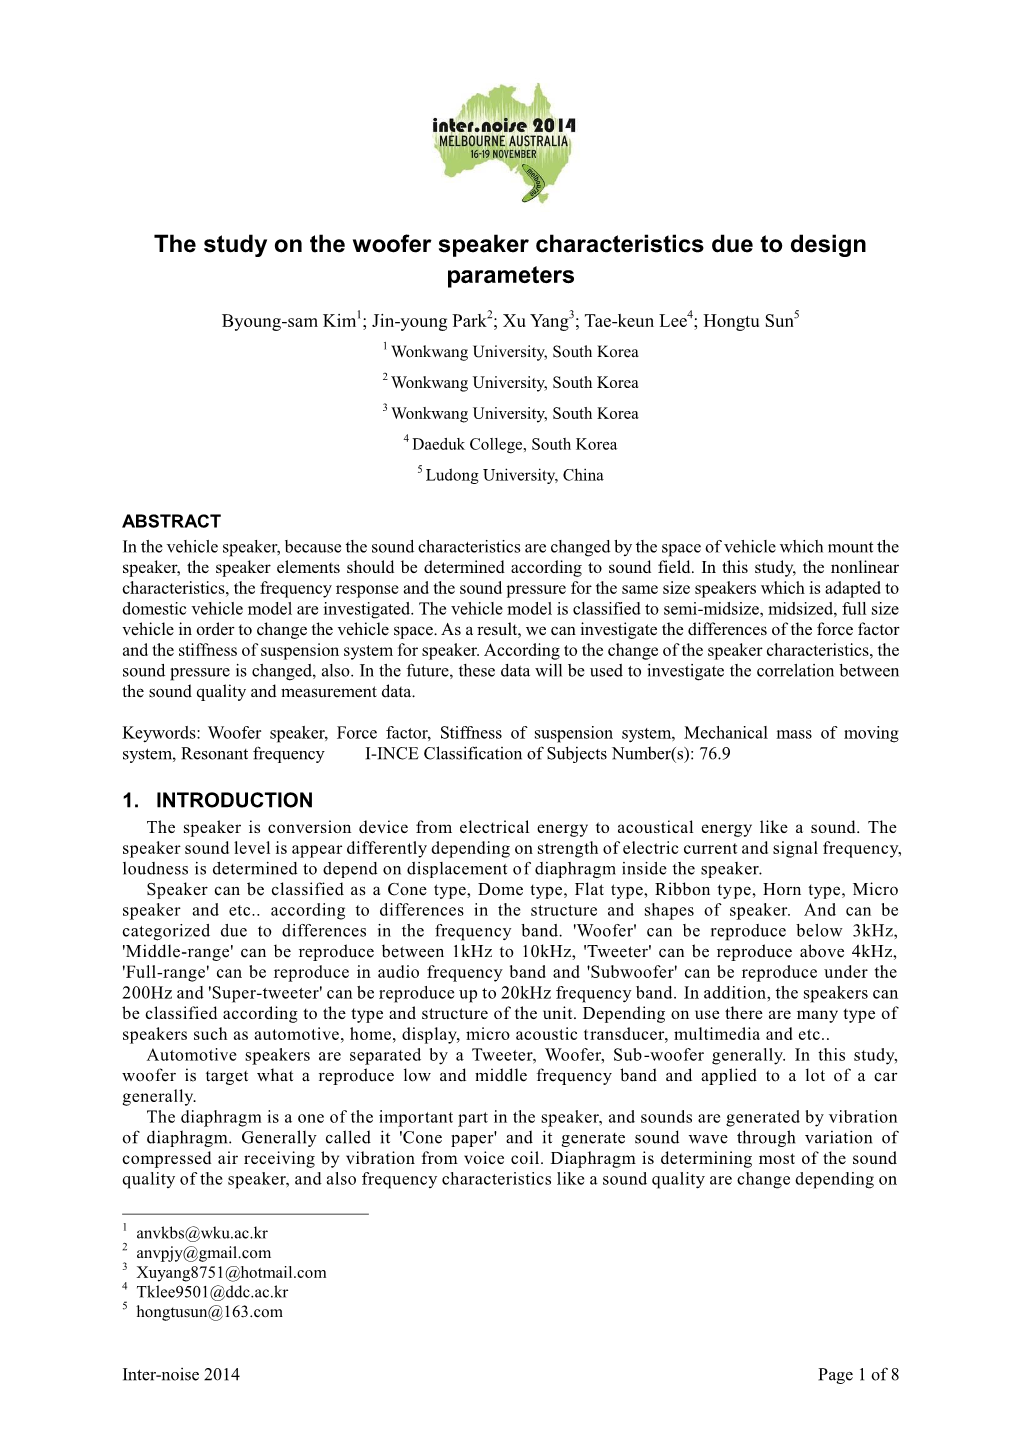 The Study on the Woofer Speaker Characteristics Due to Design Parameters